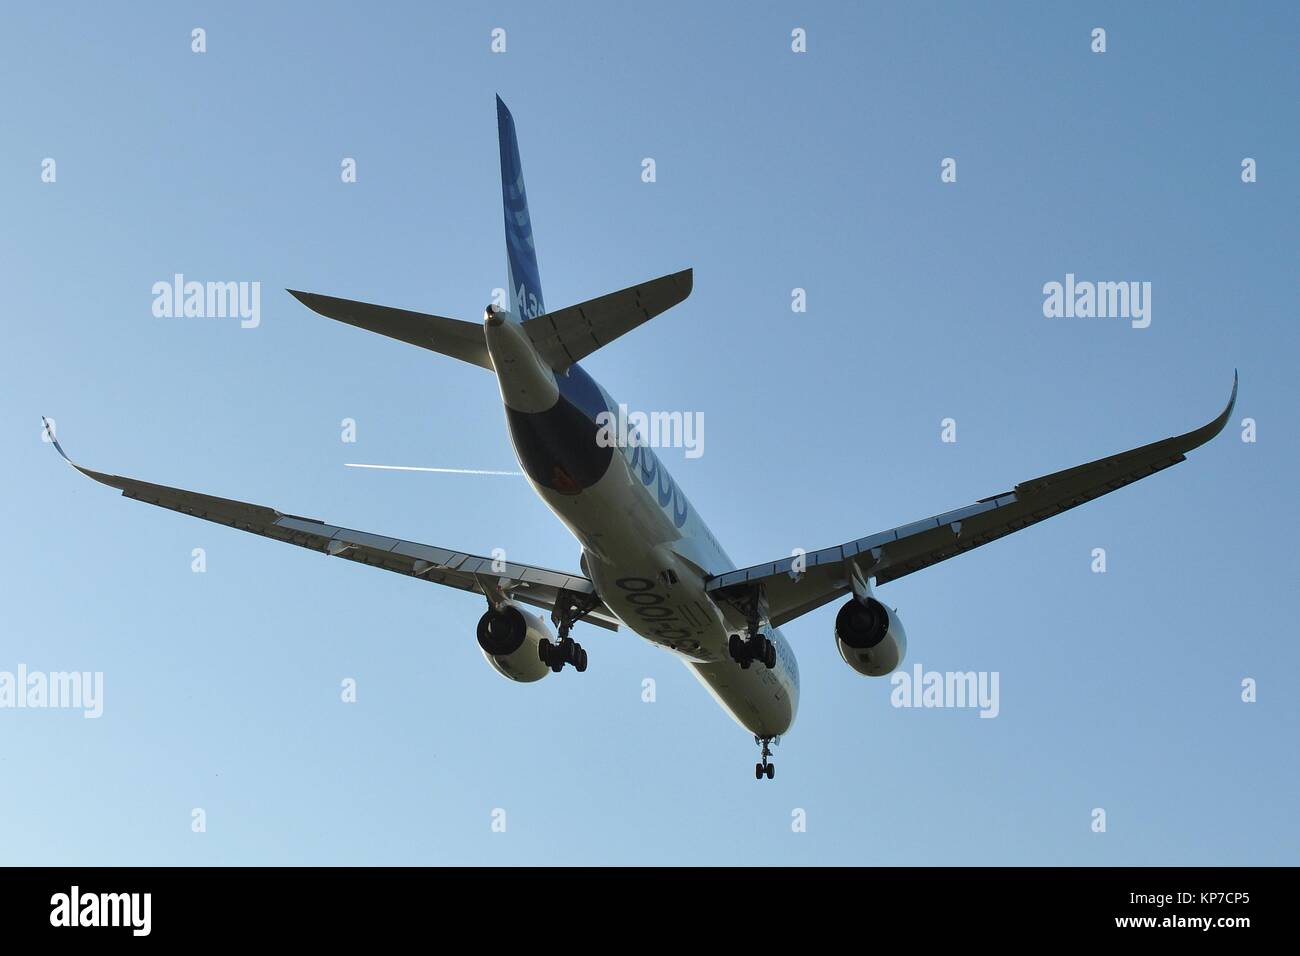 AIRBUS A350-1000 F-WMIL LANDING AFTER FLIGHT TEST Stock Photo